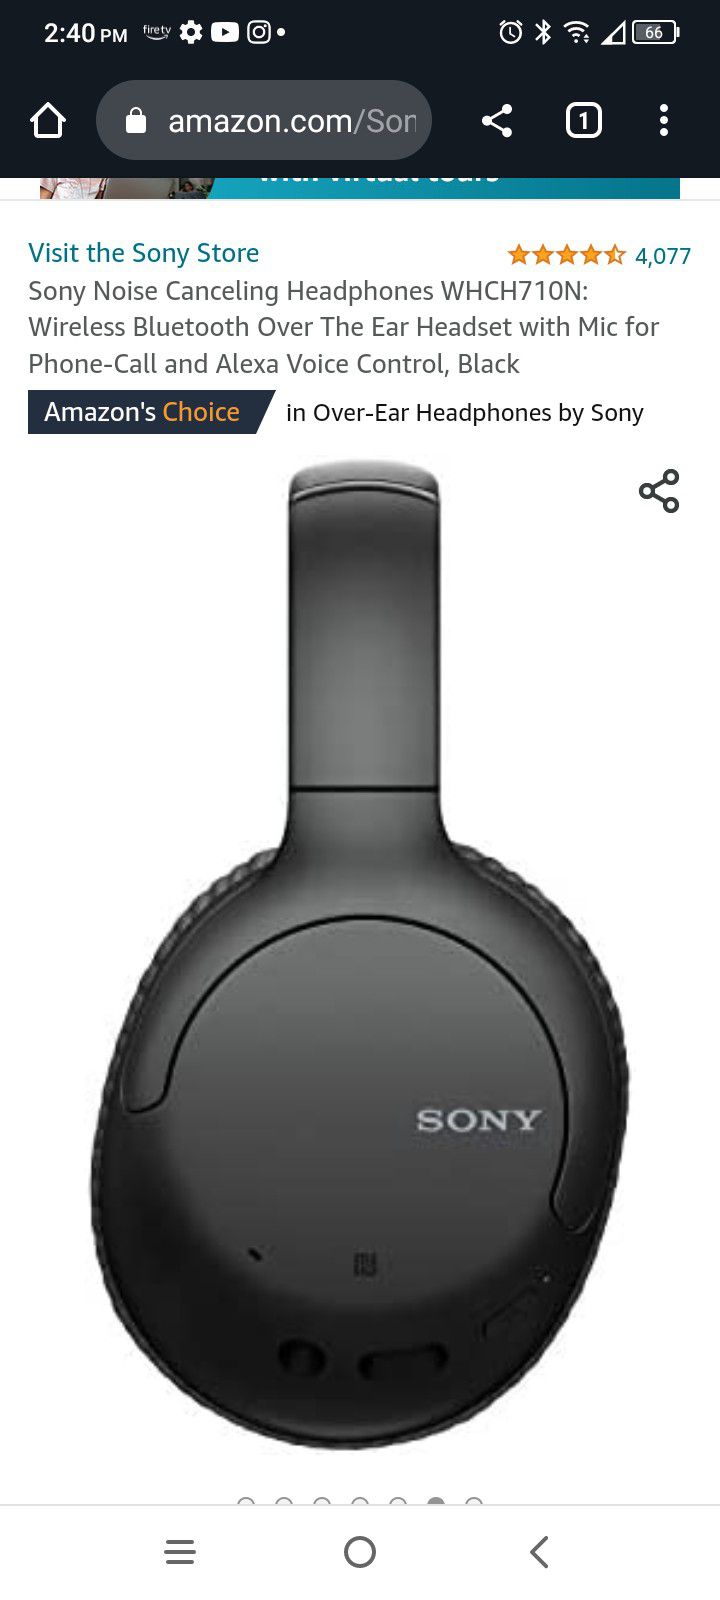 Wireless Noise Cancelling Sony - WH-CH710N Wireless Noise-Cancelling Over-the-Ear Headphones - Black

